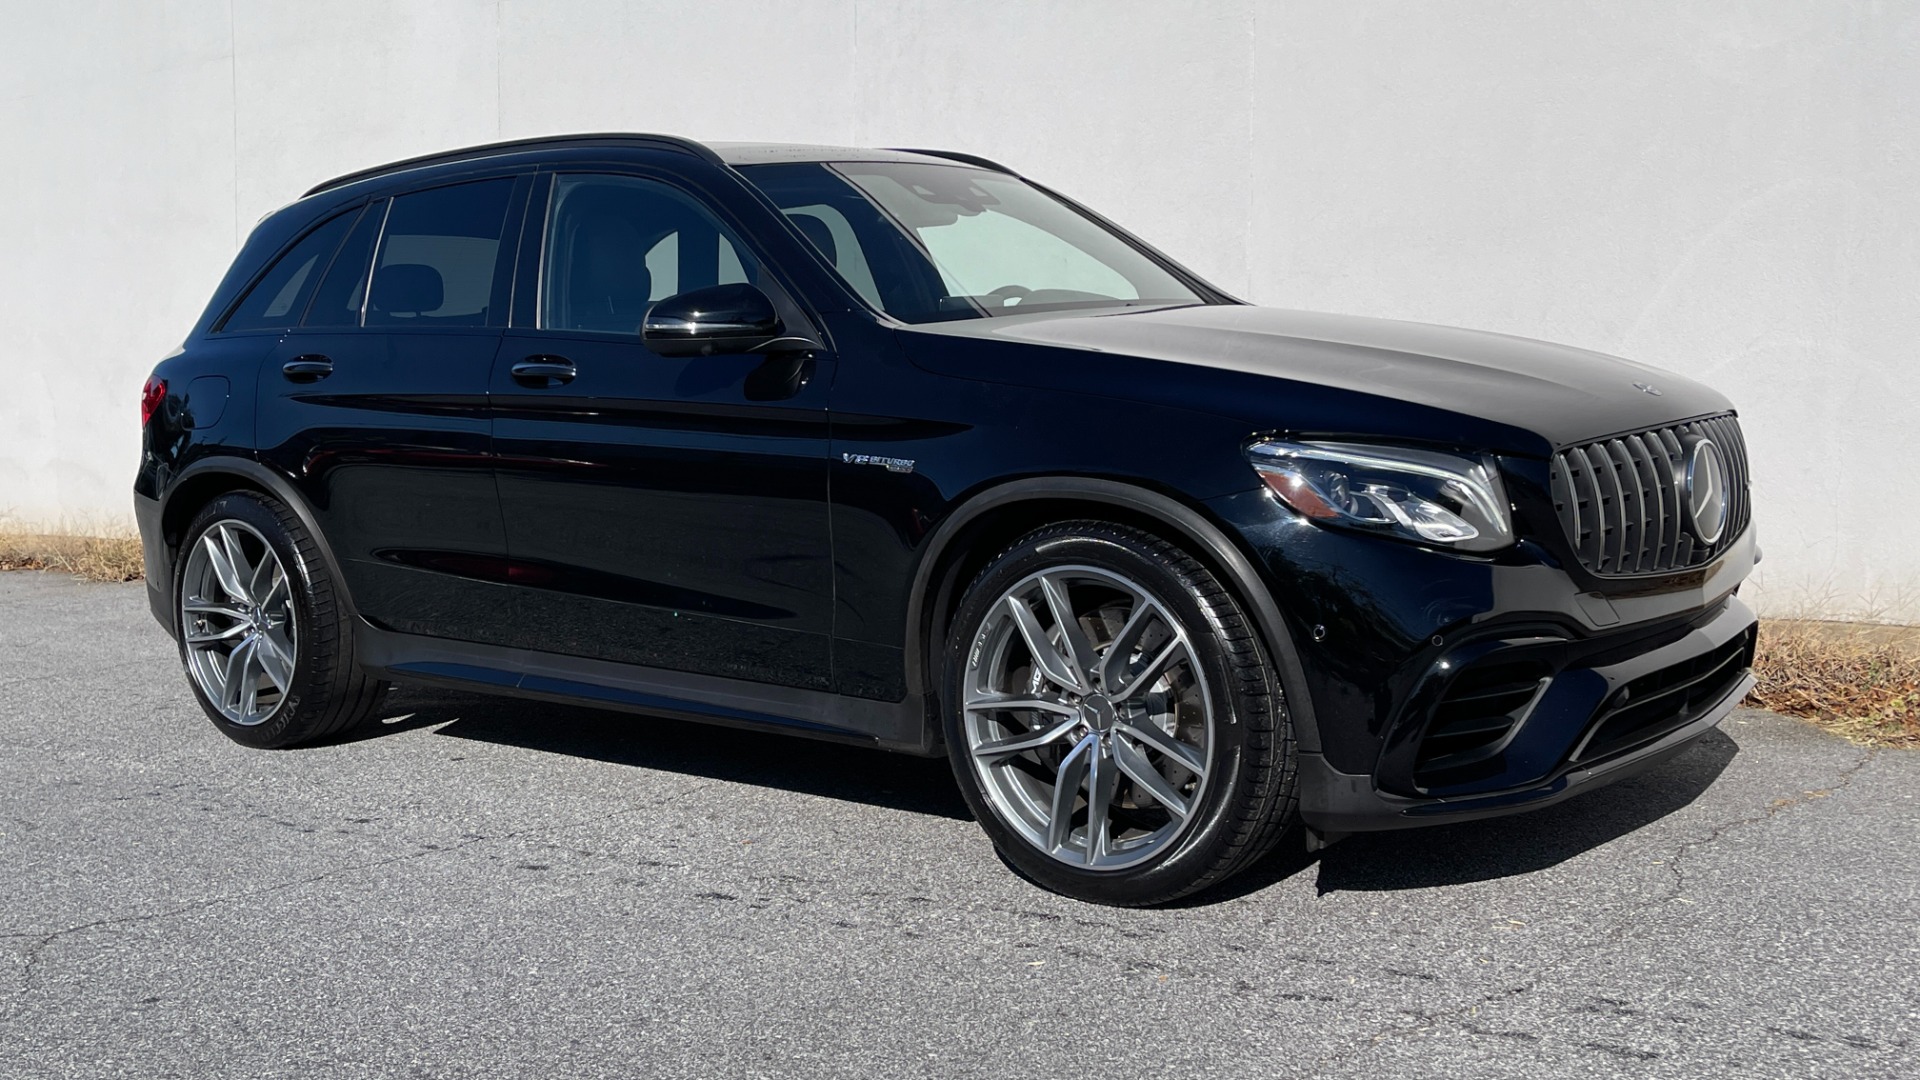 Used 2019 Mercedes-Benz GLC AMG GLC 63 / DRIVER ASSIST / AMG EXHAUST / CARBON FIBER / MULTIMEDIA for sale $61,995 at Formula Imports in Charlotte NC 28227 5